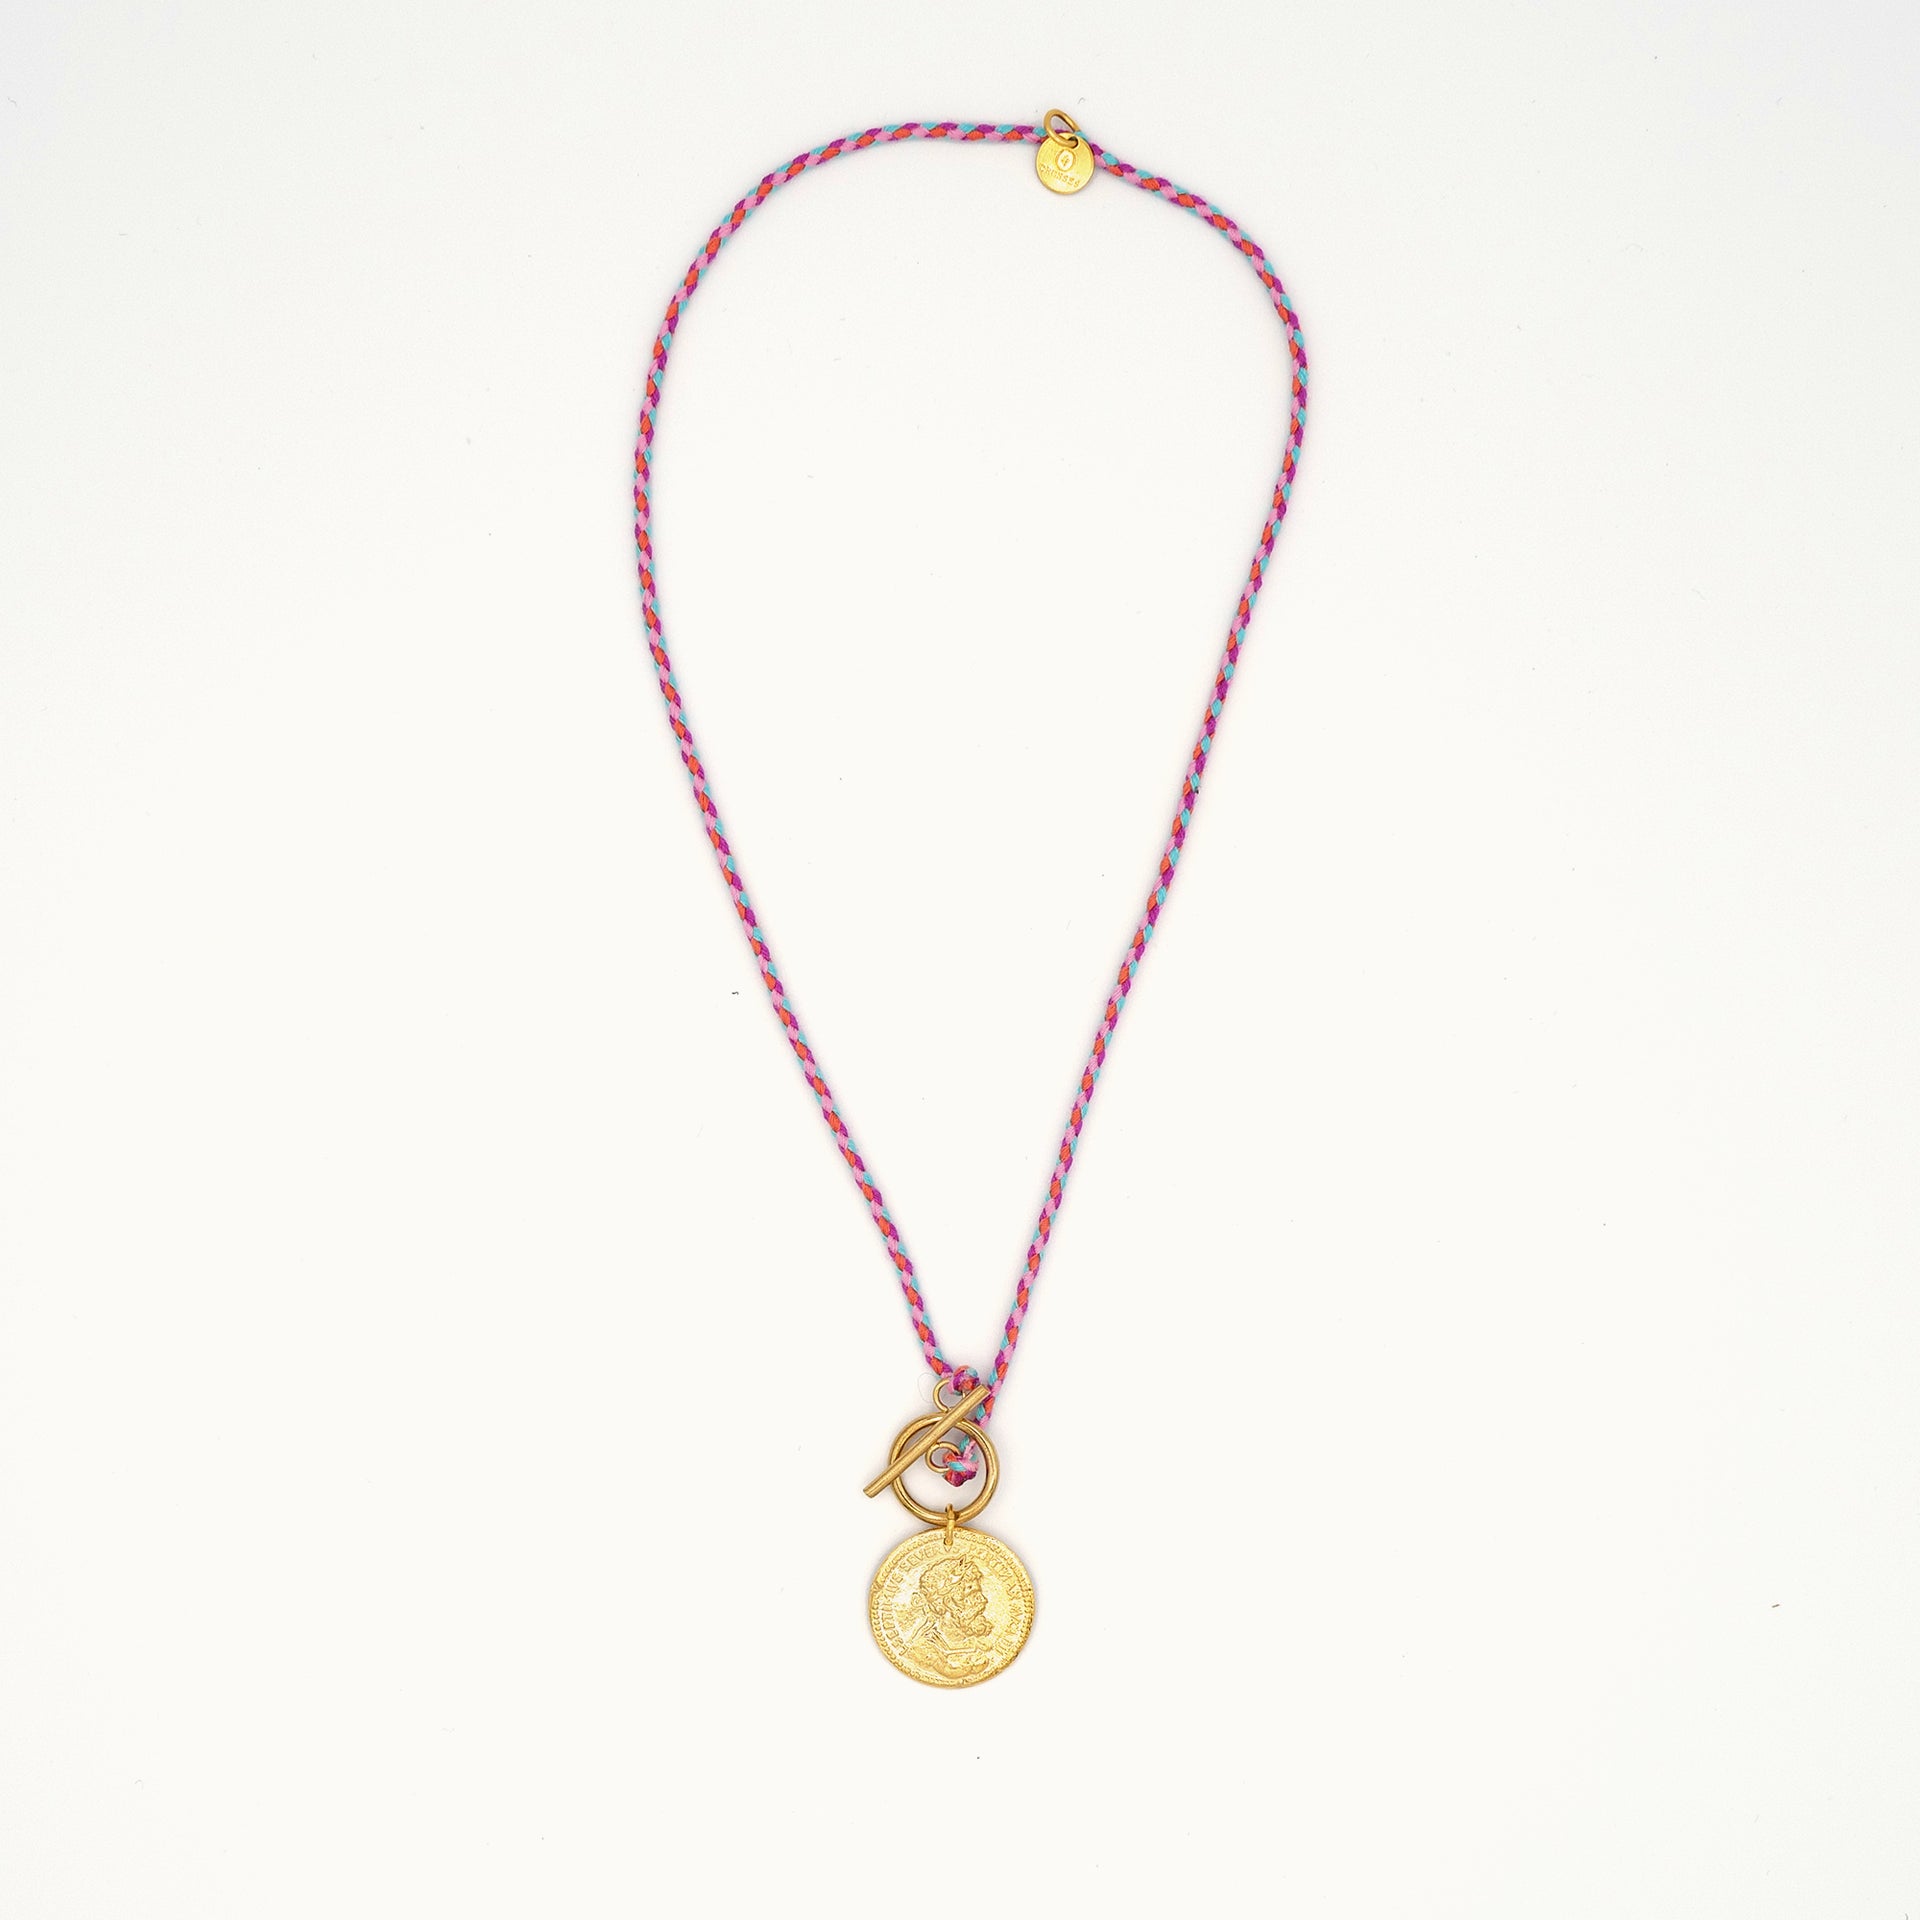 Gold plated necklace with pink cordon by 4 crosses